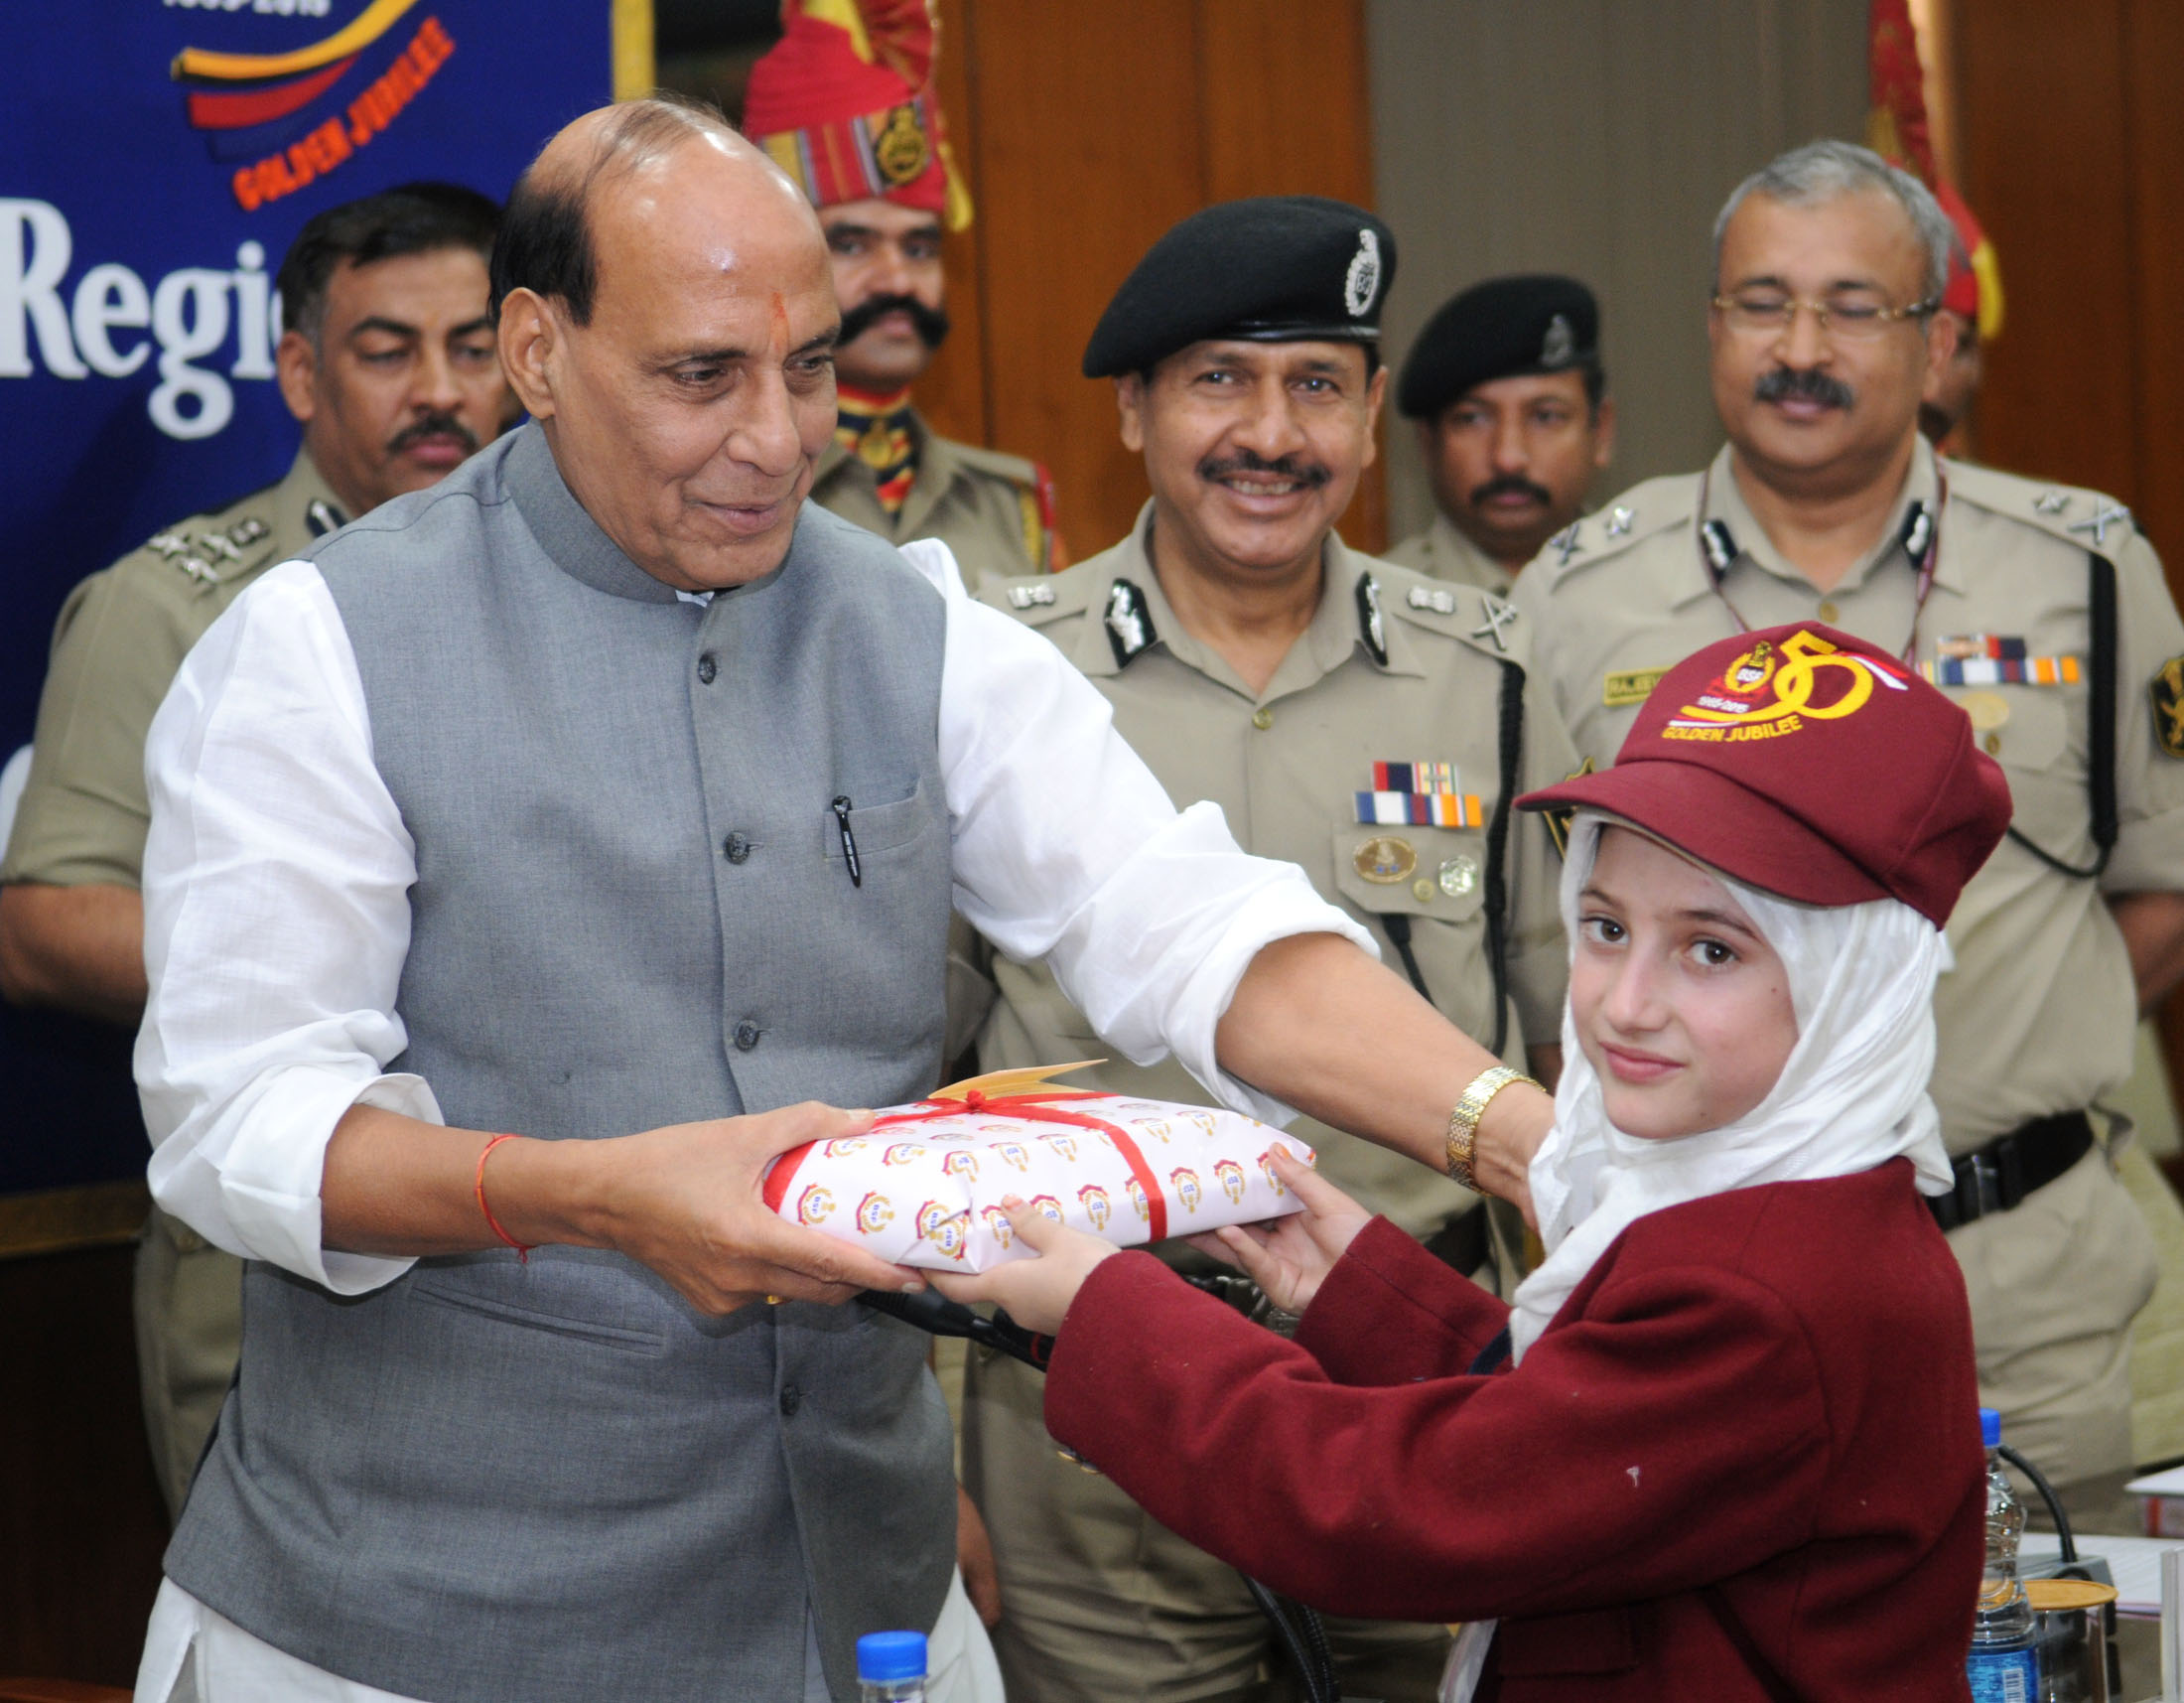 The Union Home Minister, Shri Rajnath Singh presenting gift to the school children from Kashmir region who are on a Bharat Darshan tour being conducted by the Border Security Force, in New Delhi on November 13, 2015. 	The Director General, BSF, Shri D.K. Pathak is also seen.